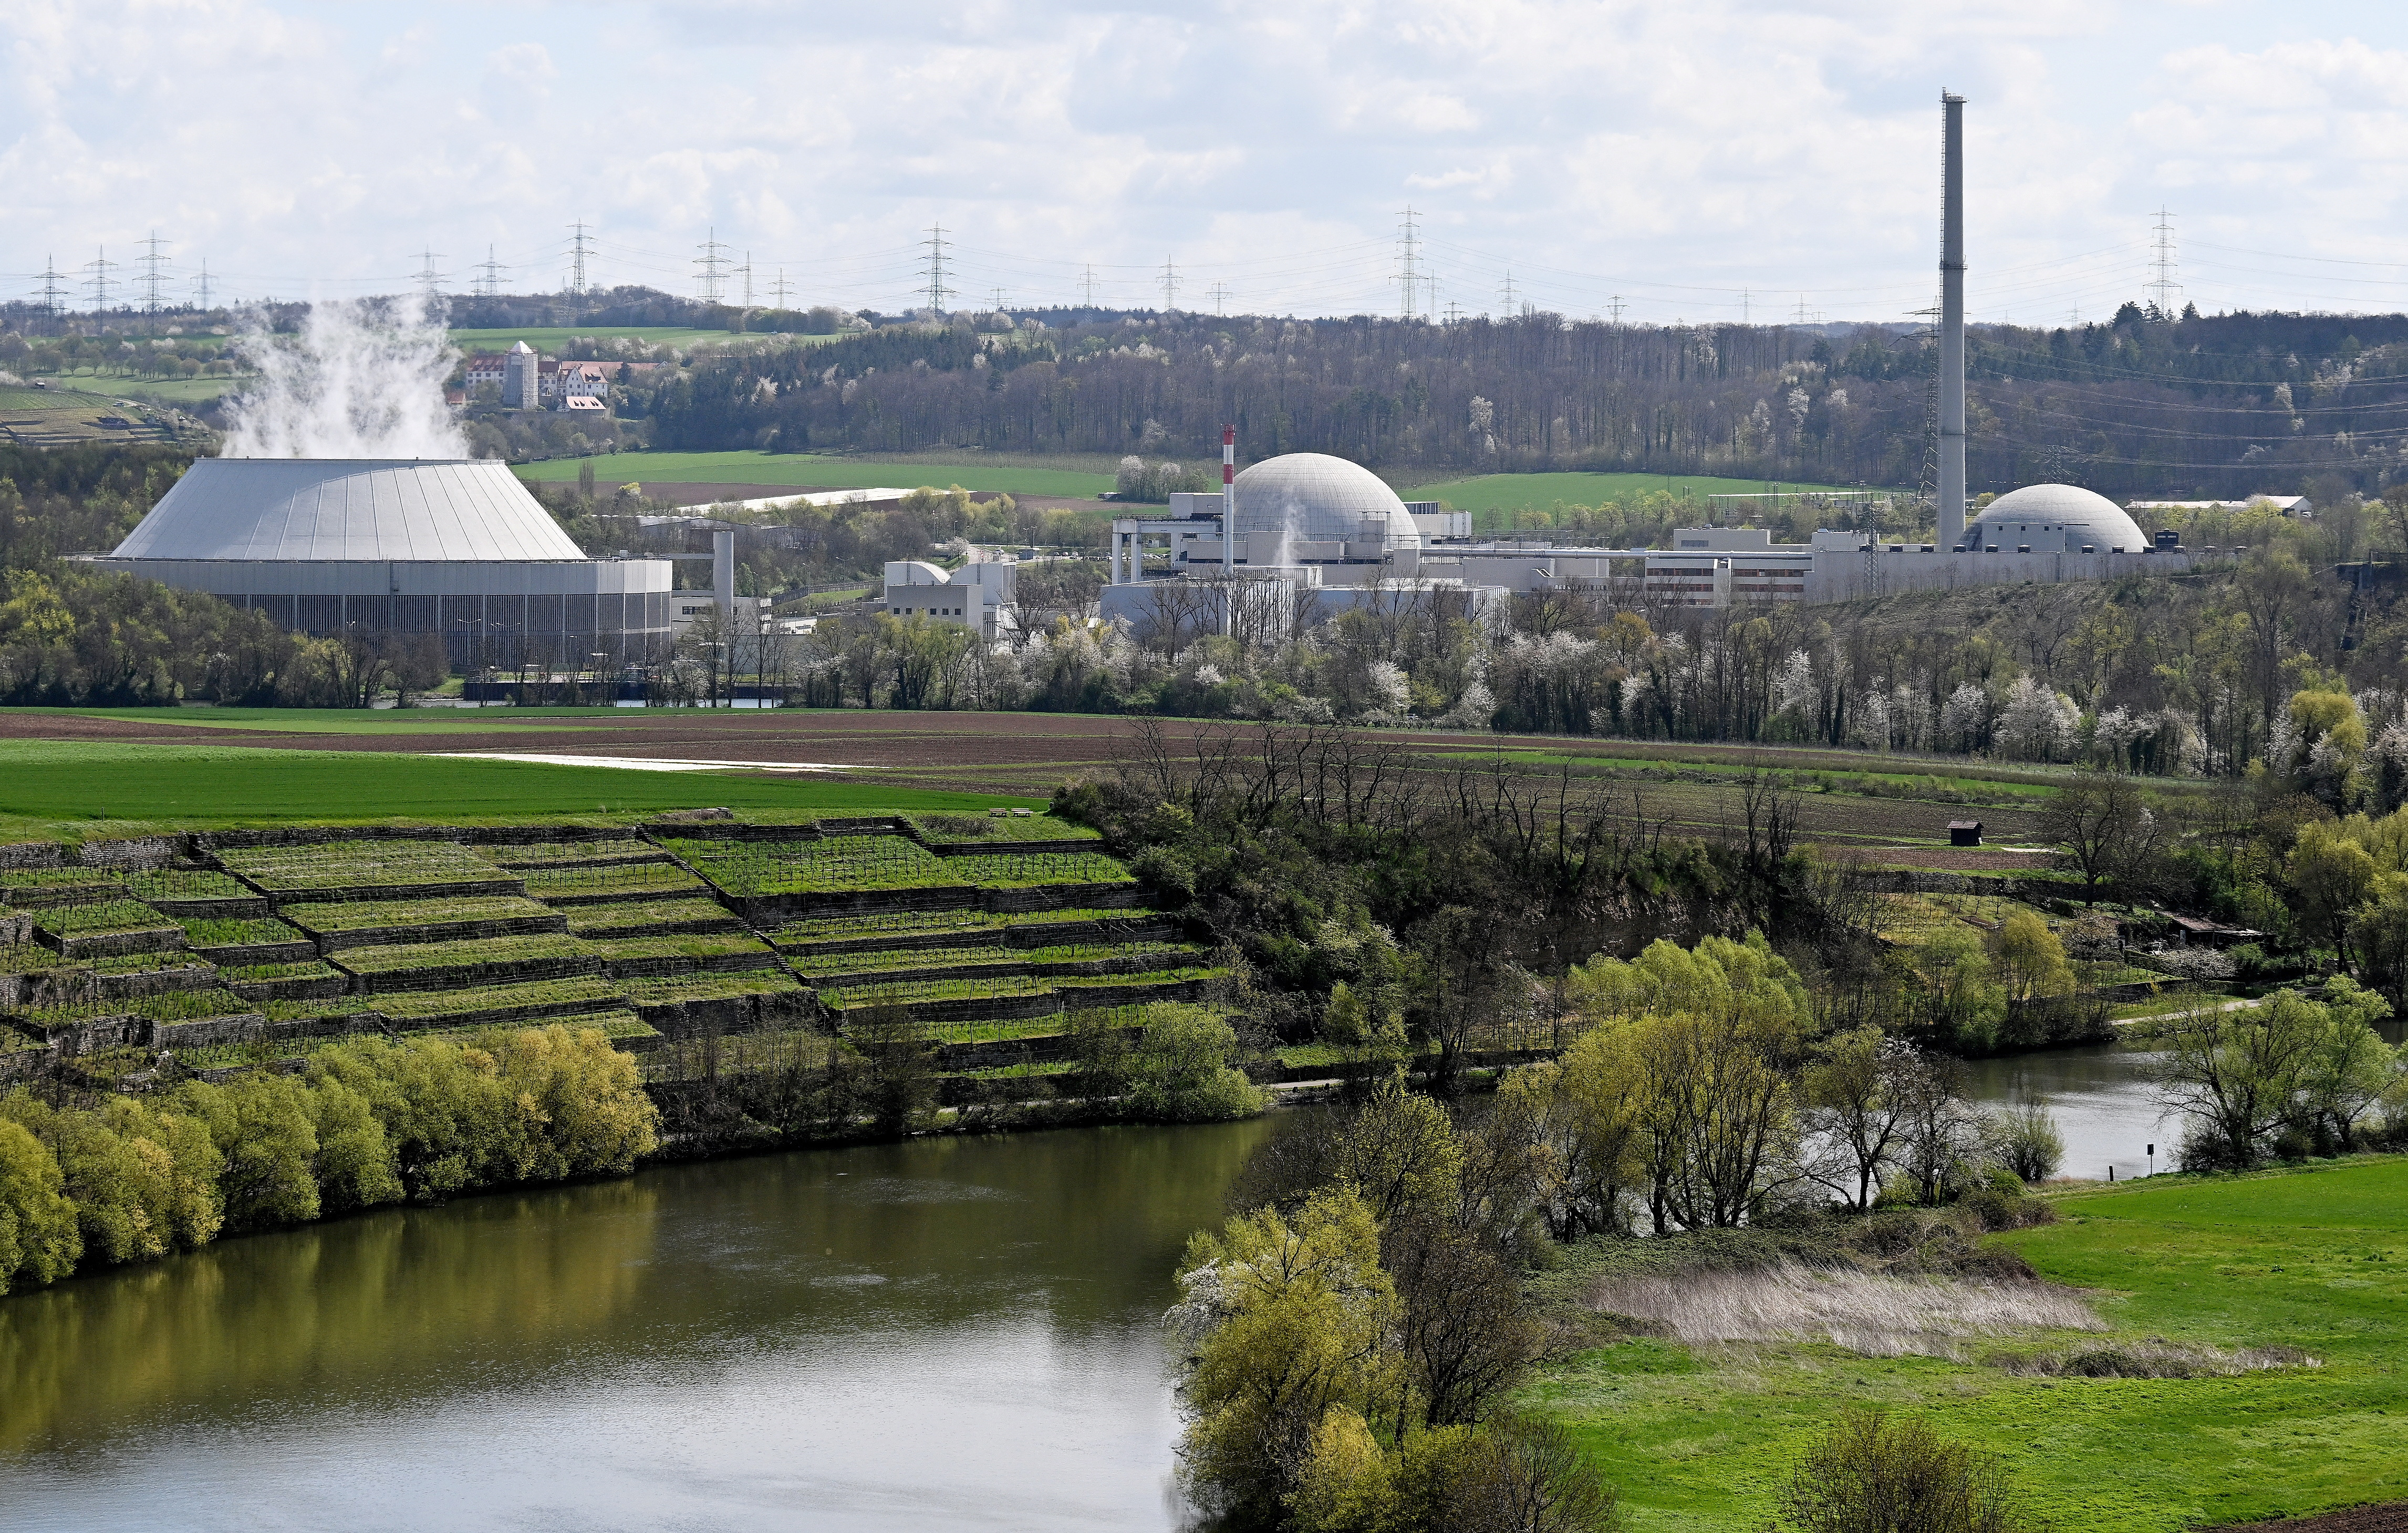 Germany shuts down last nuclear power plants, some scientists aghast